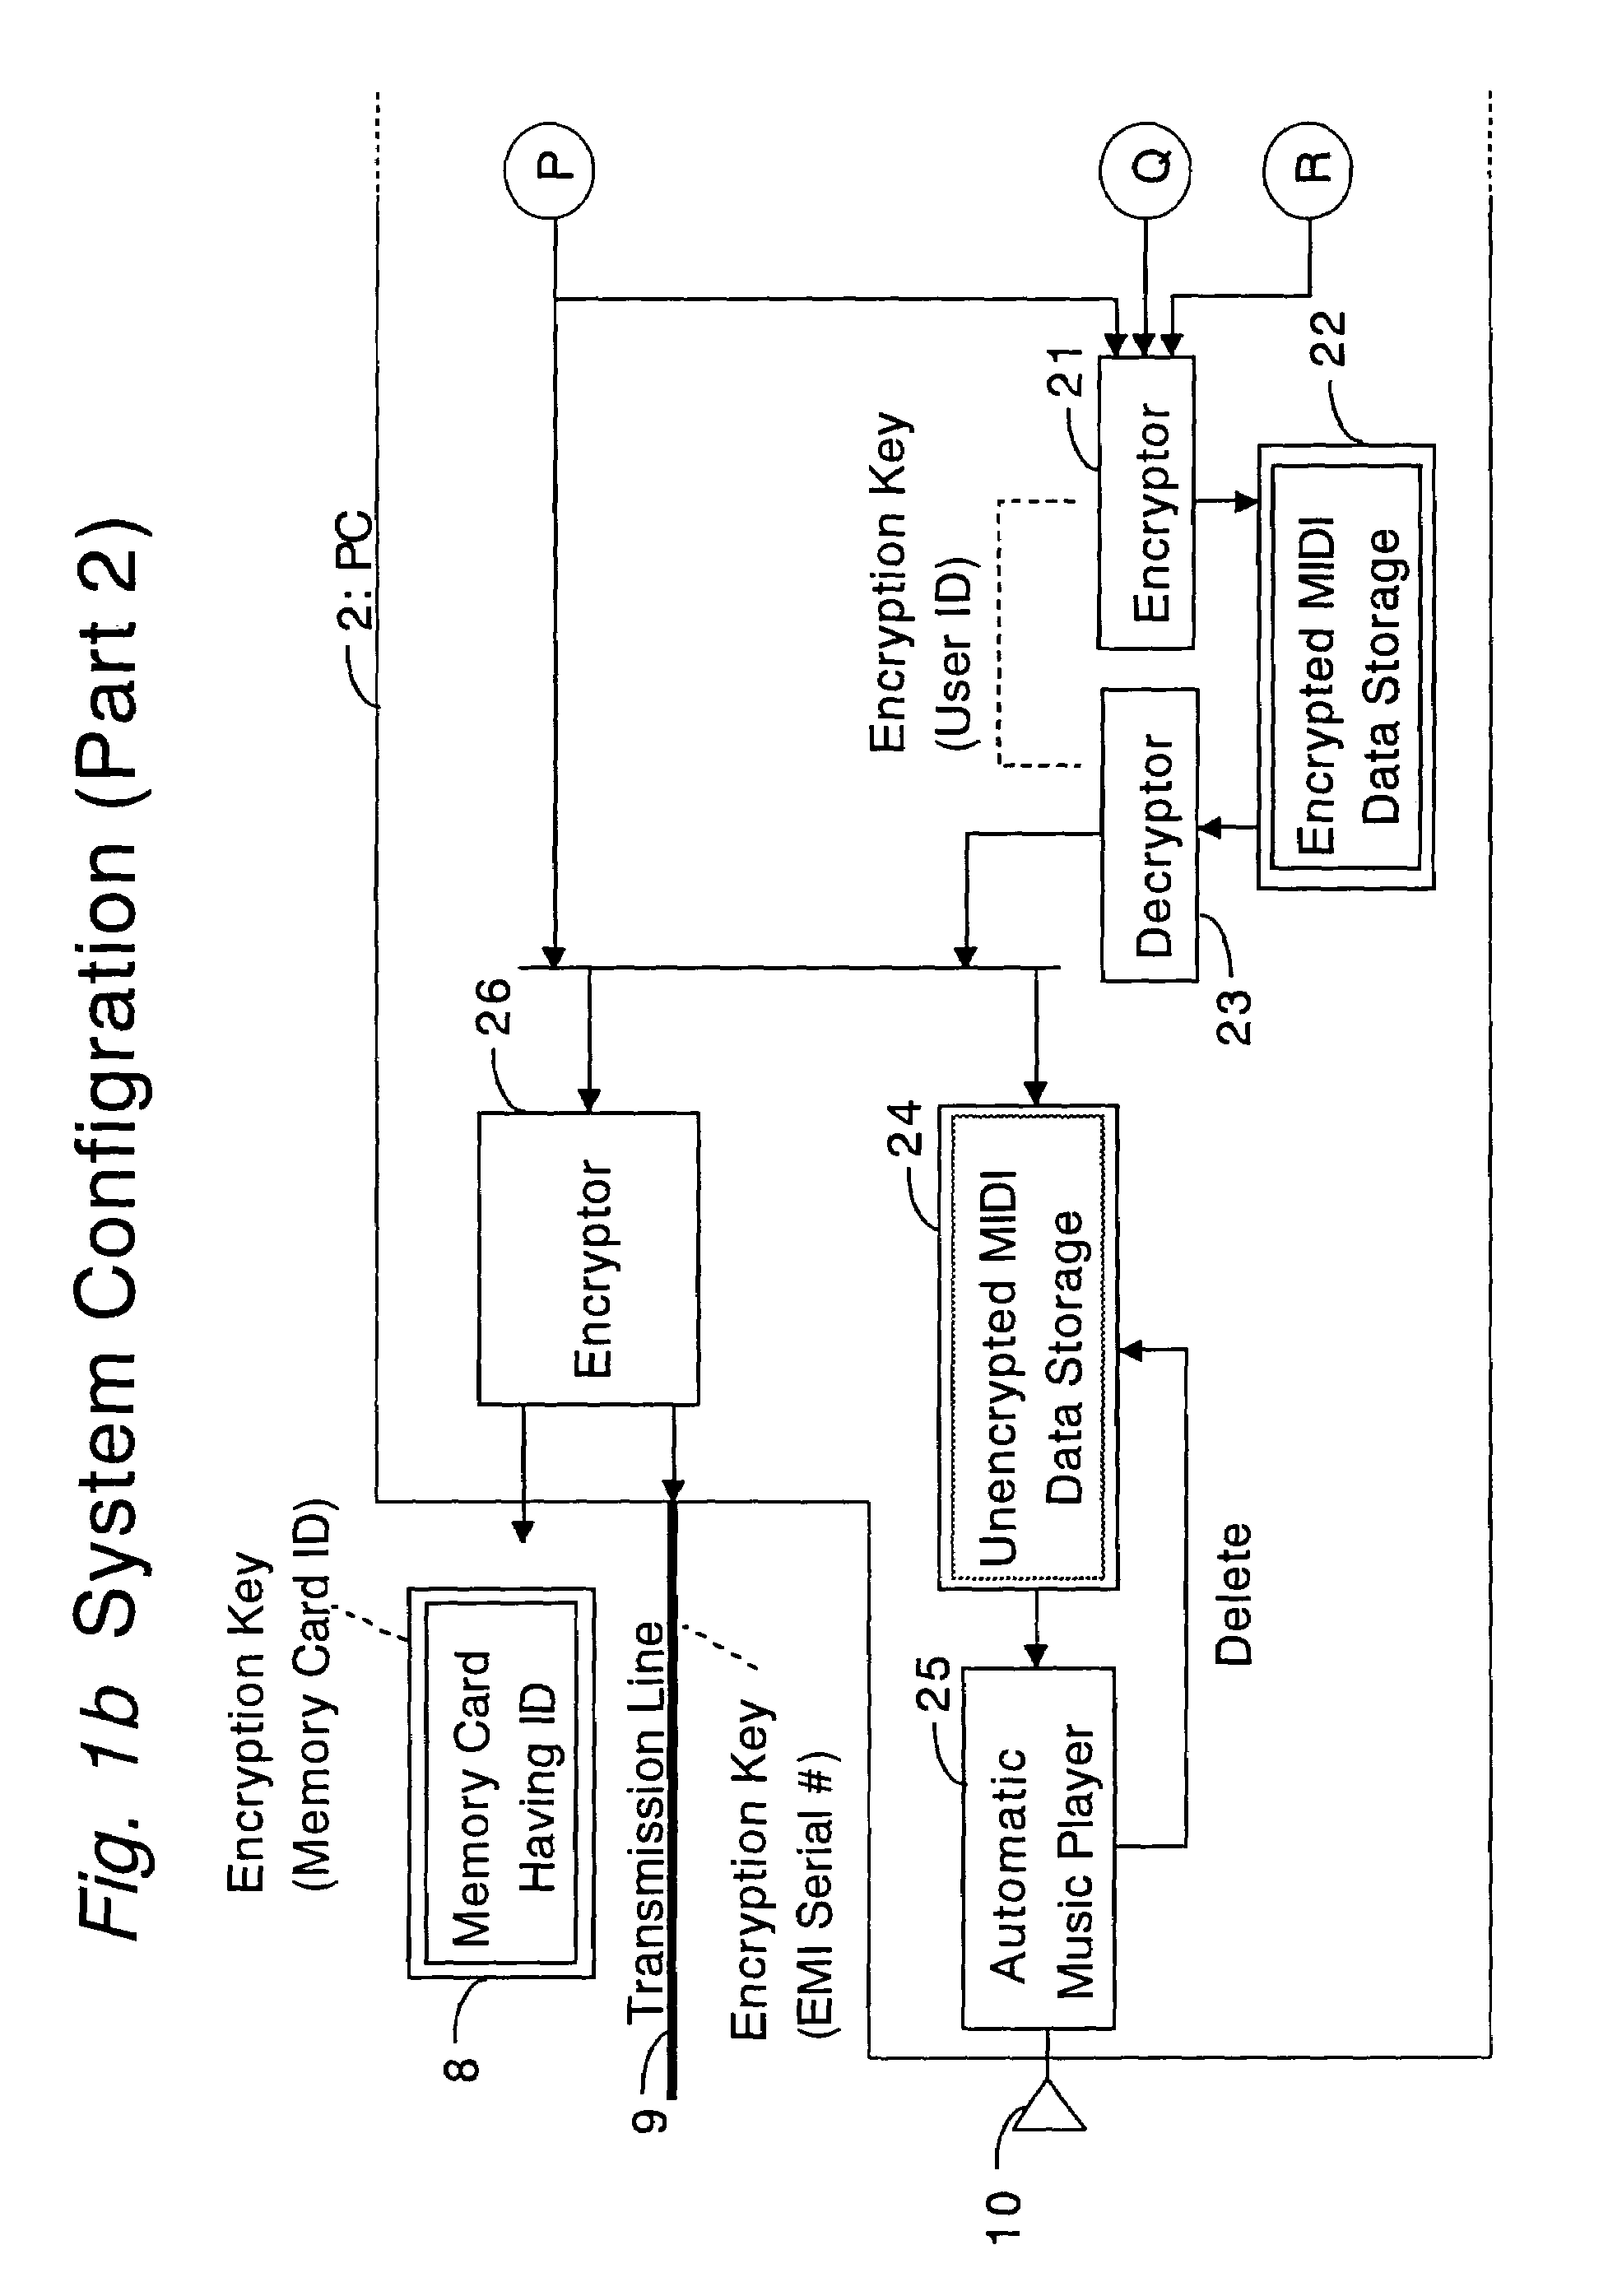 System, method and computer program for ensuring secure use of music playing data files